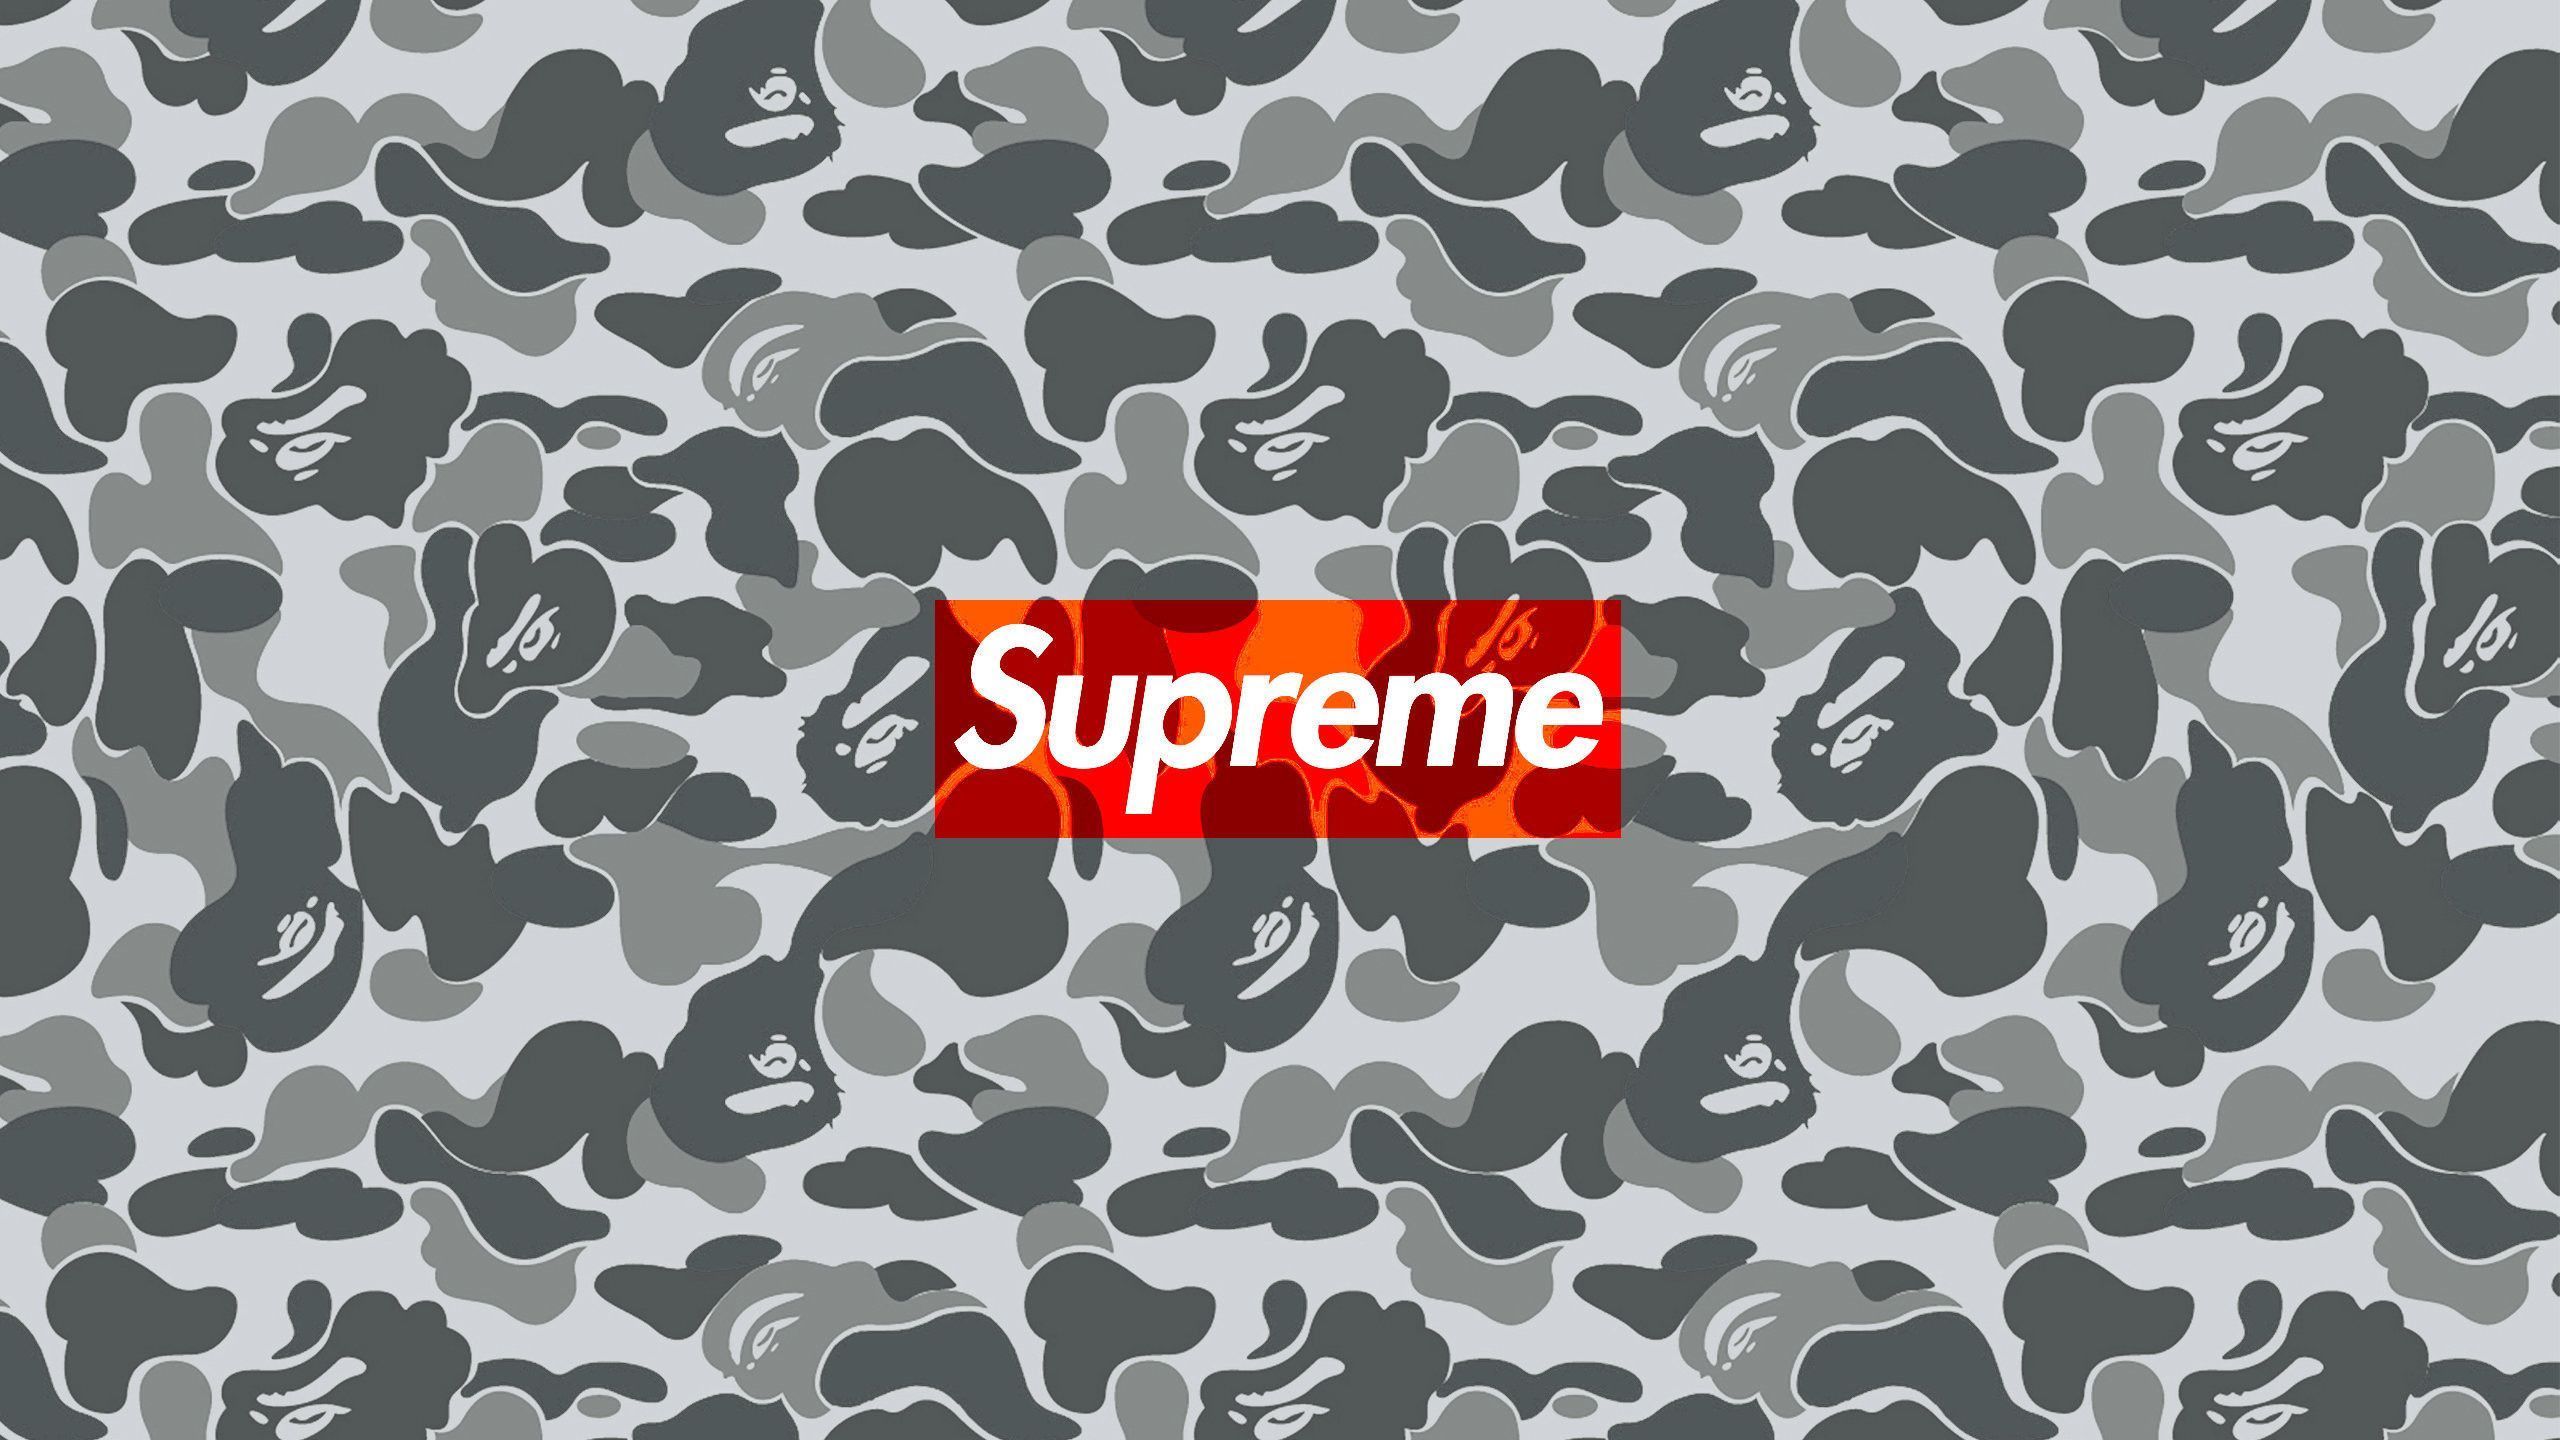 The Supreme Bape Camo Wallpaper Below For Your